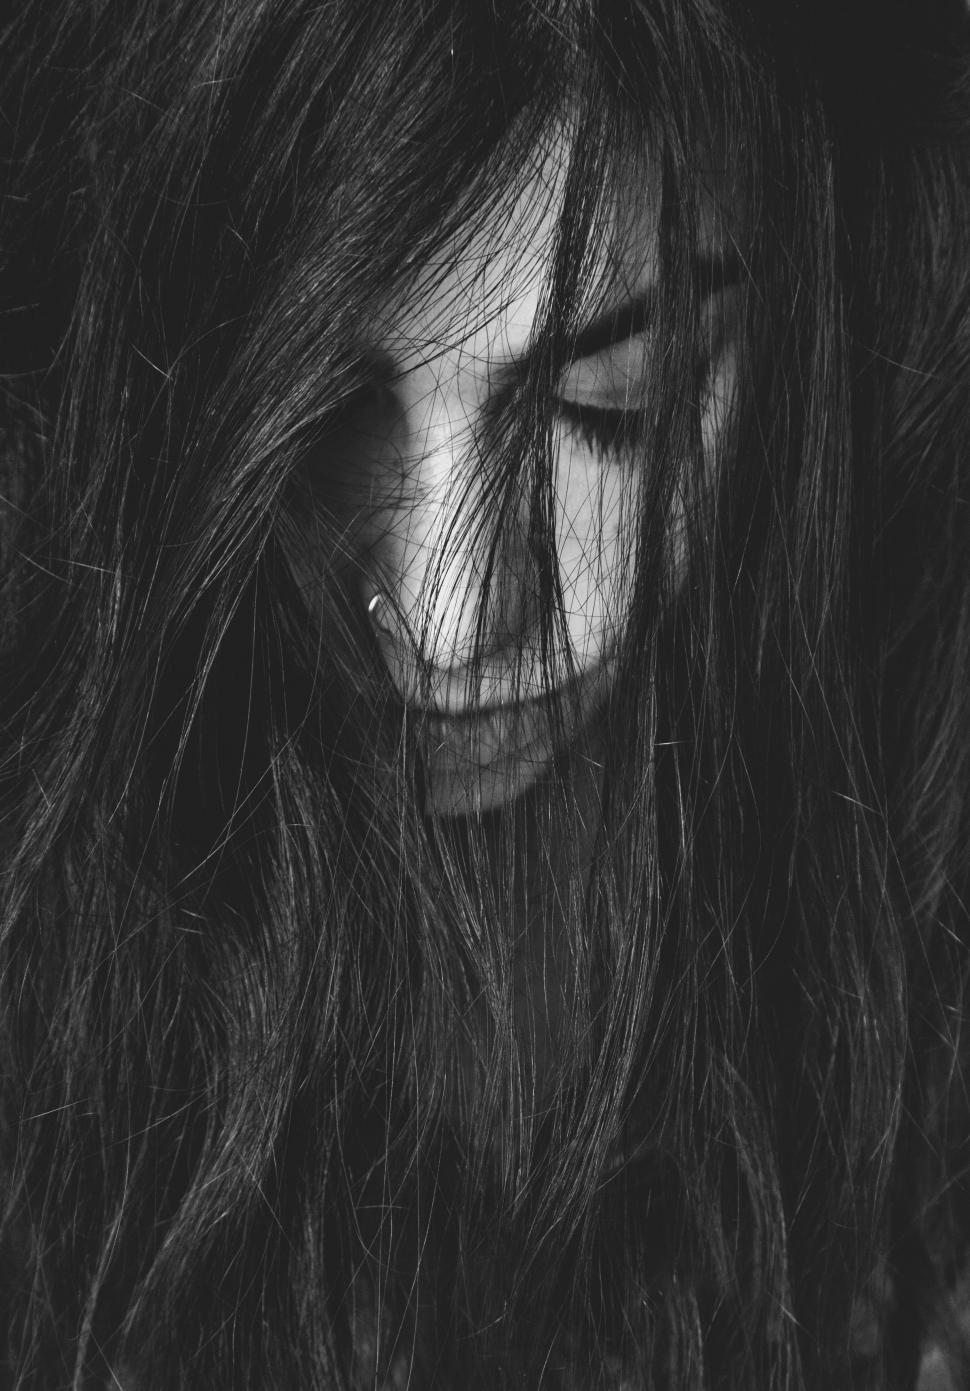 Free Image of Woman With Long Hair in Black and White 